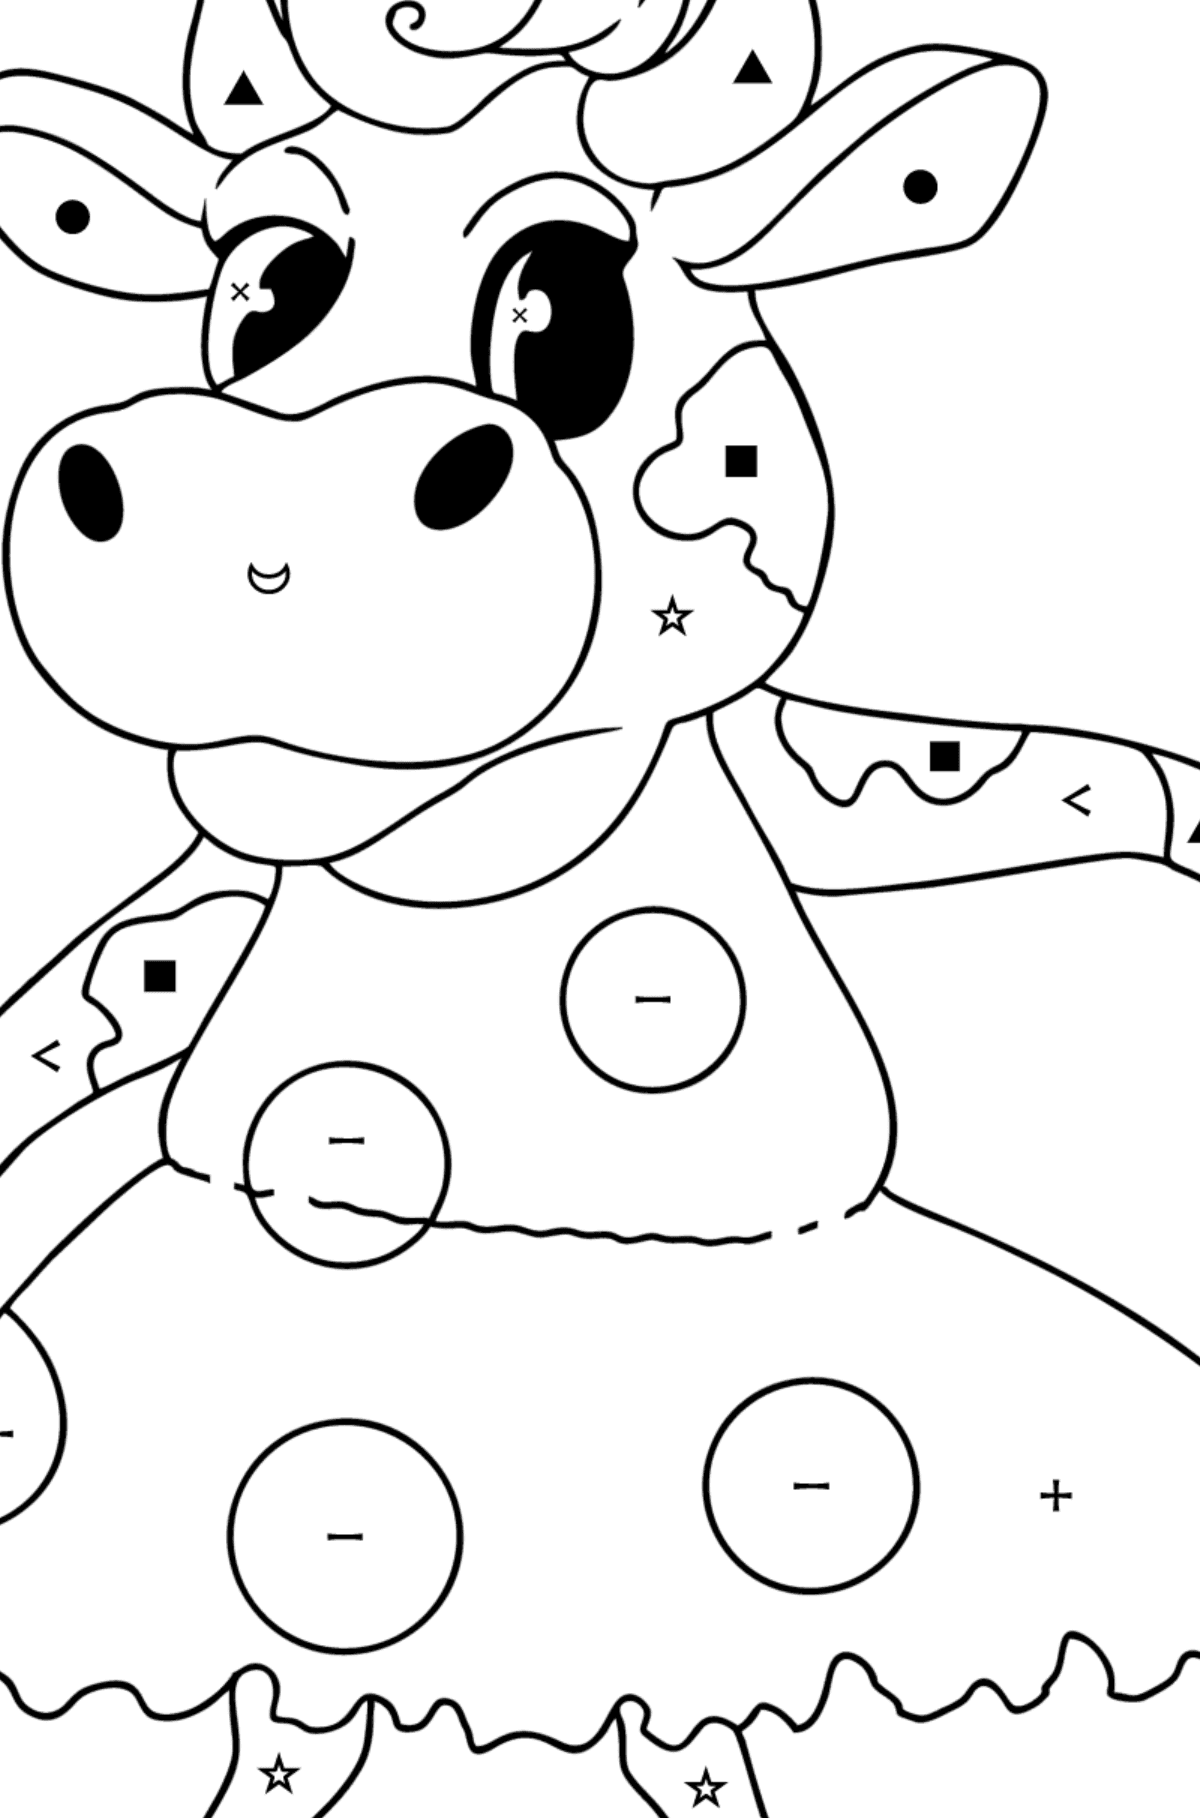 Kawaii cow standing up coloring page - Coloring by Symbols and Geometric Shapes for Kids